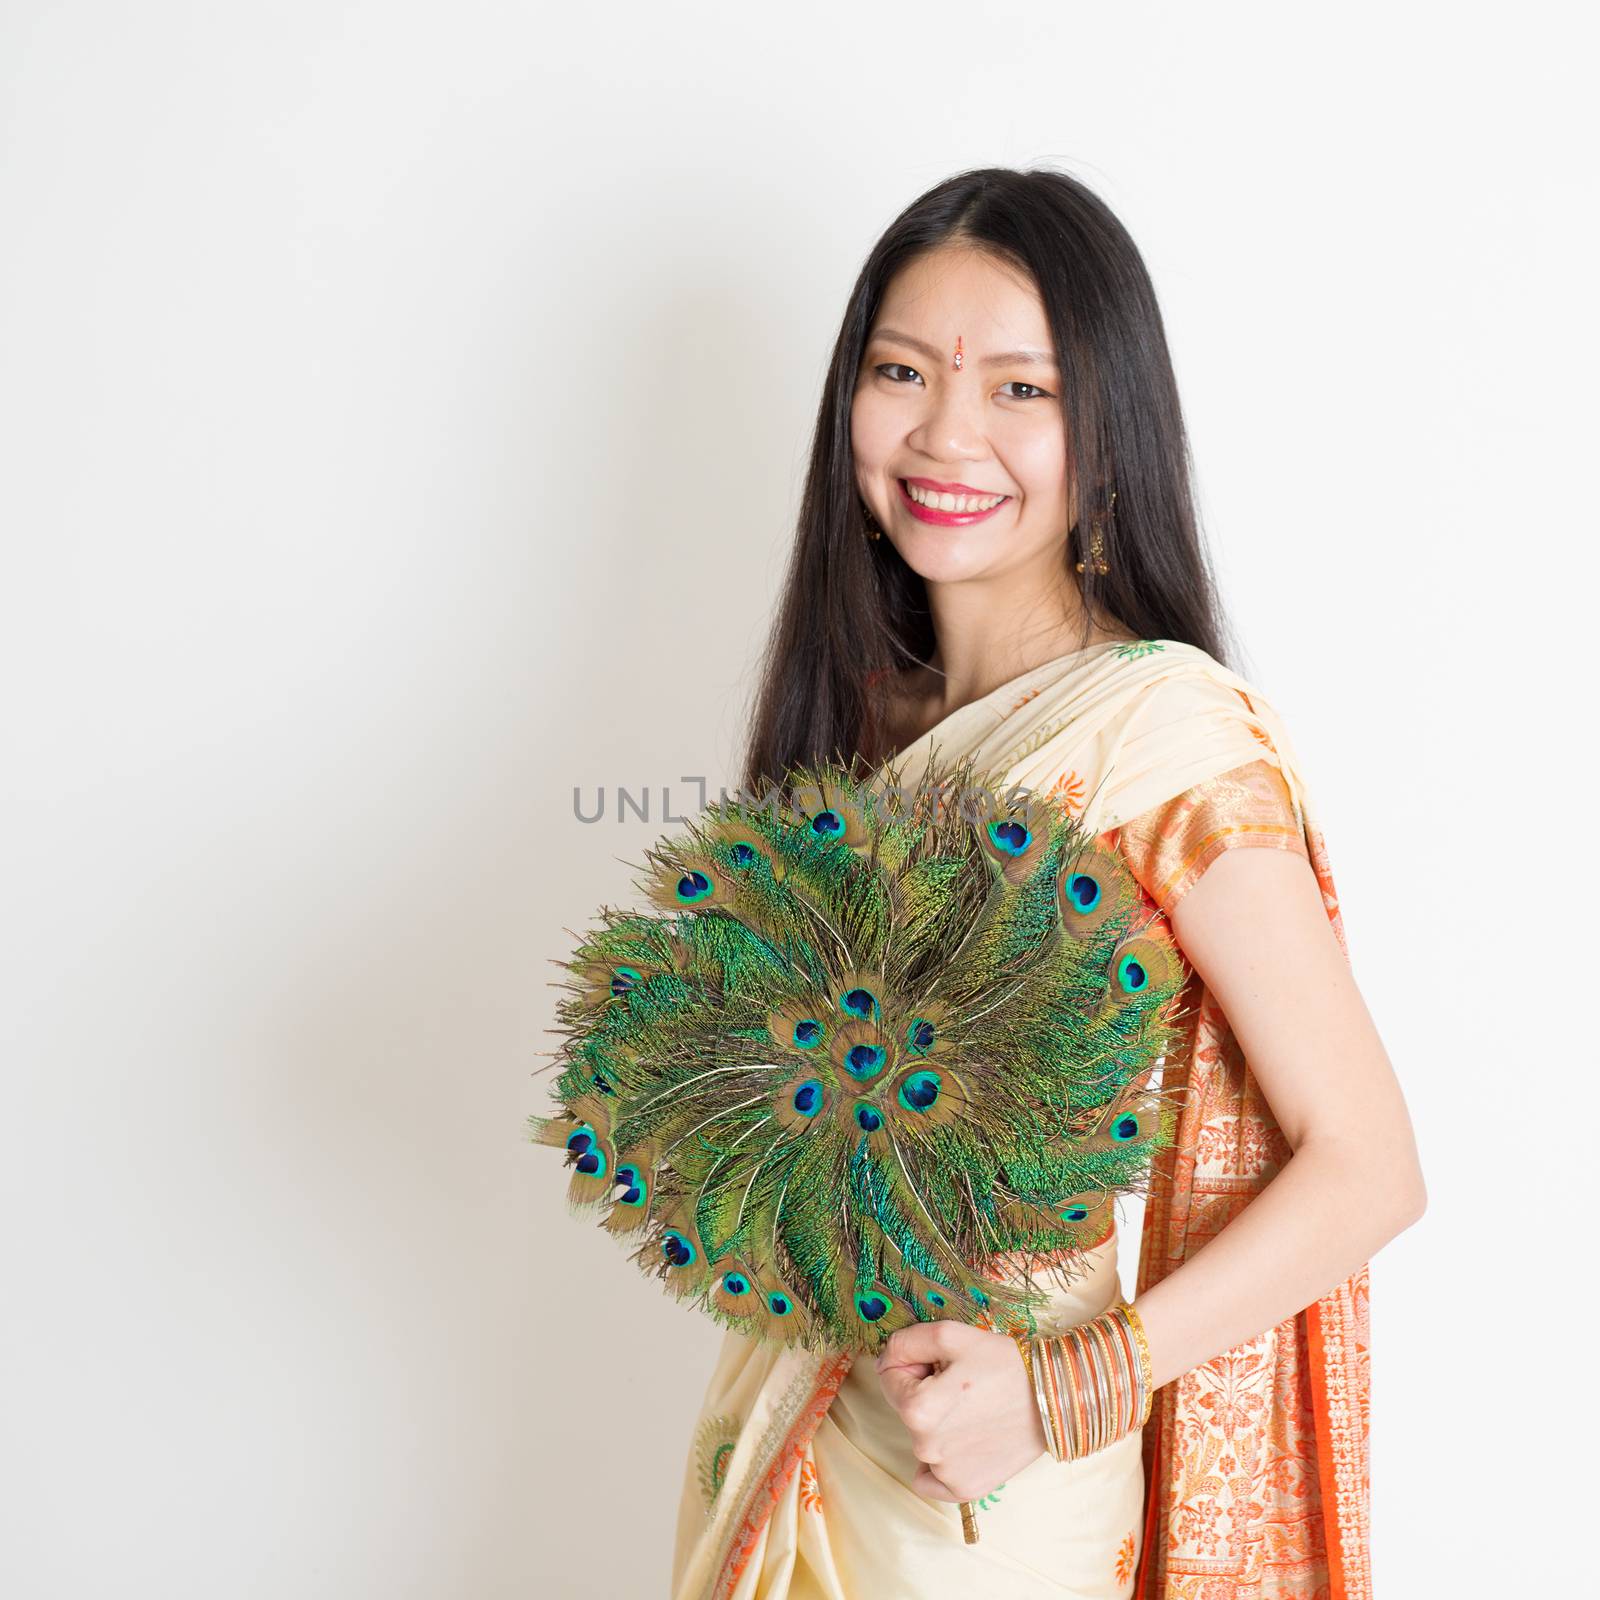 Young girl with peacock feather fan in Indian sari dress by szefei